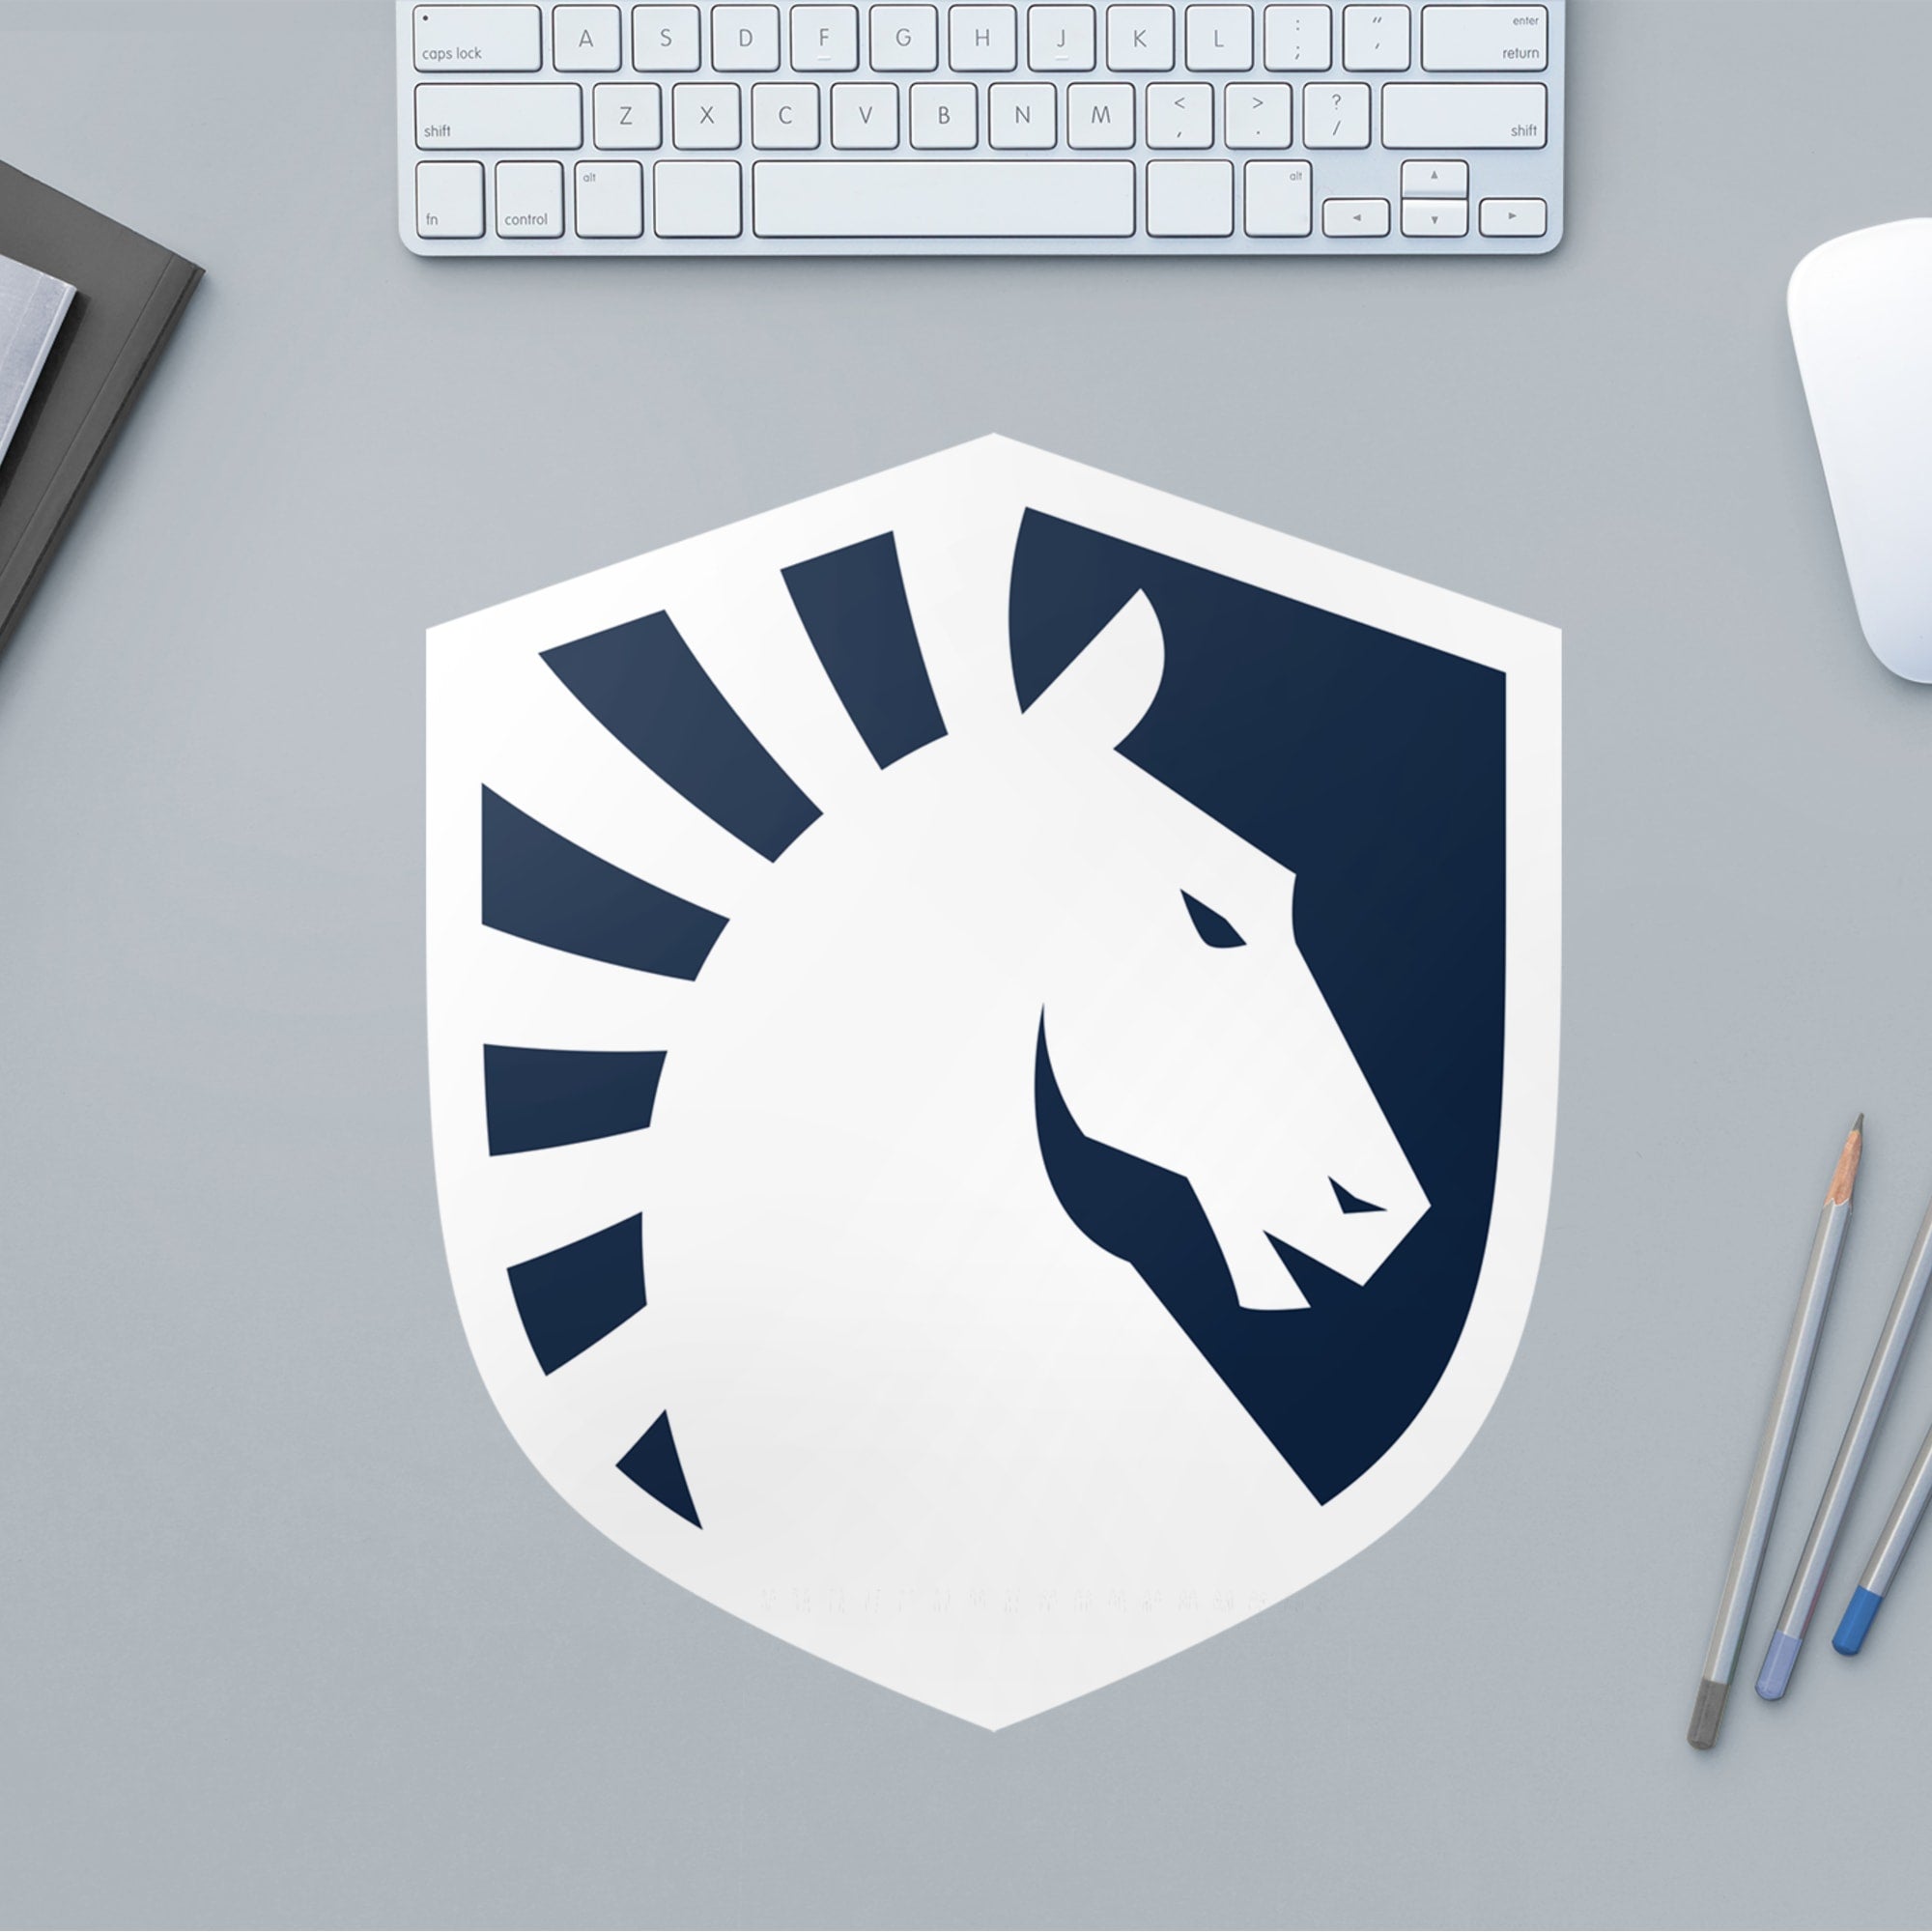 Team Liquid: Logo - Officially Licensed Removable Wall Decal 9.0"W x 12.0"H by Fathead | Vinyl